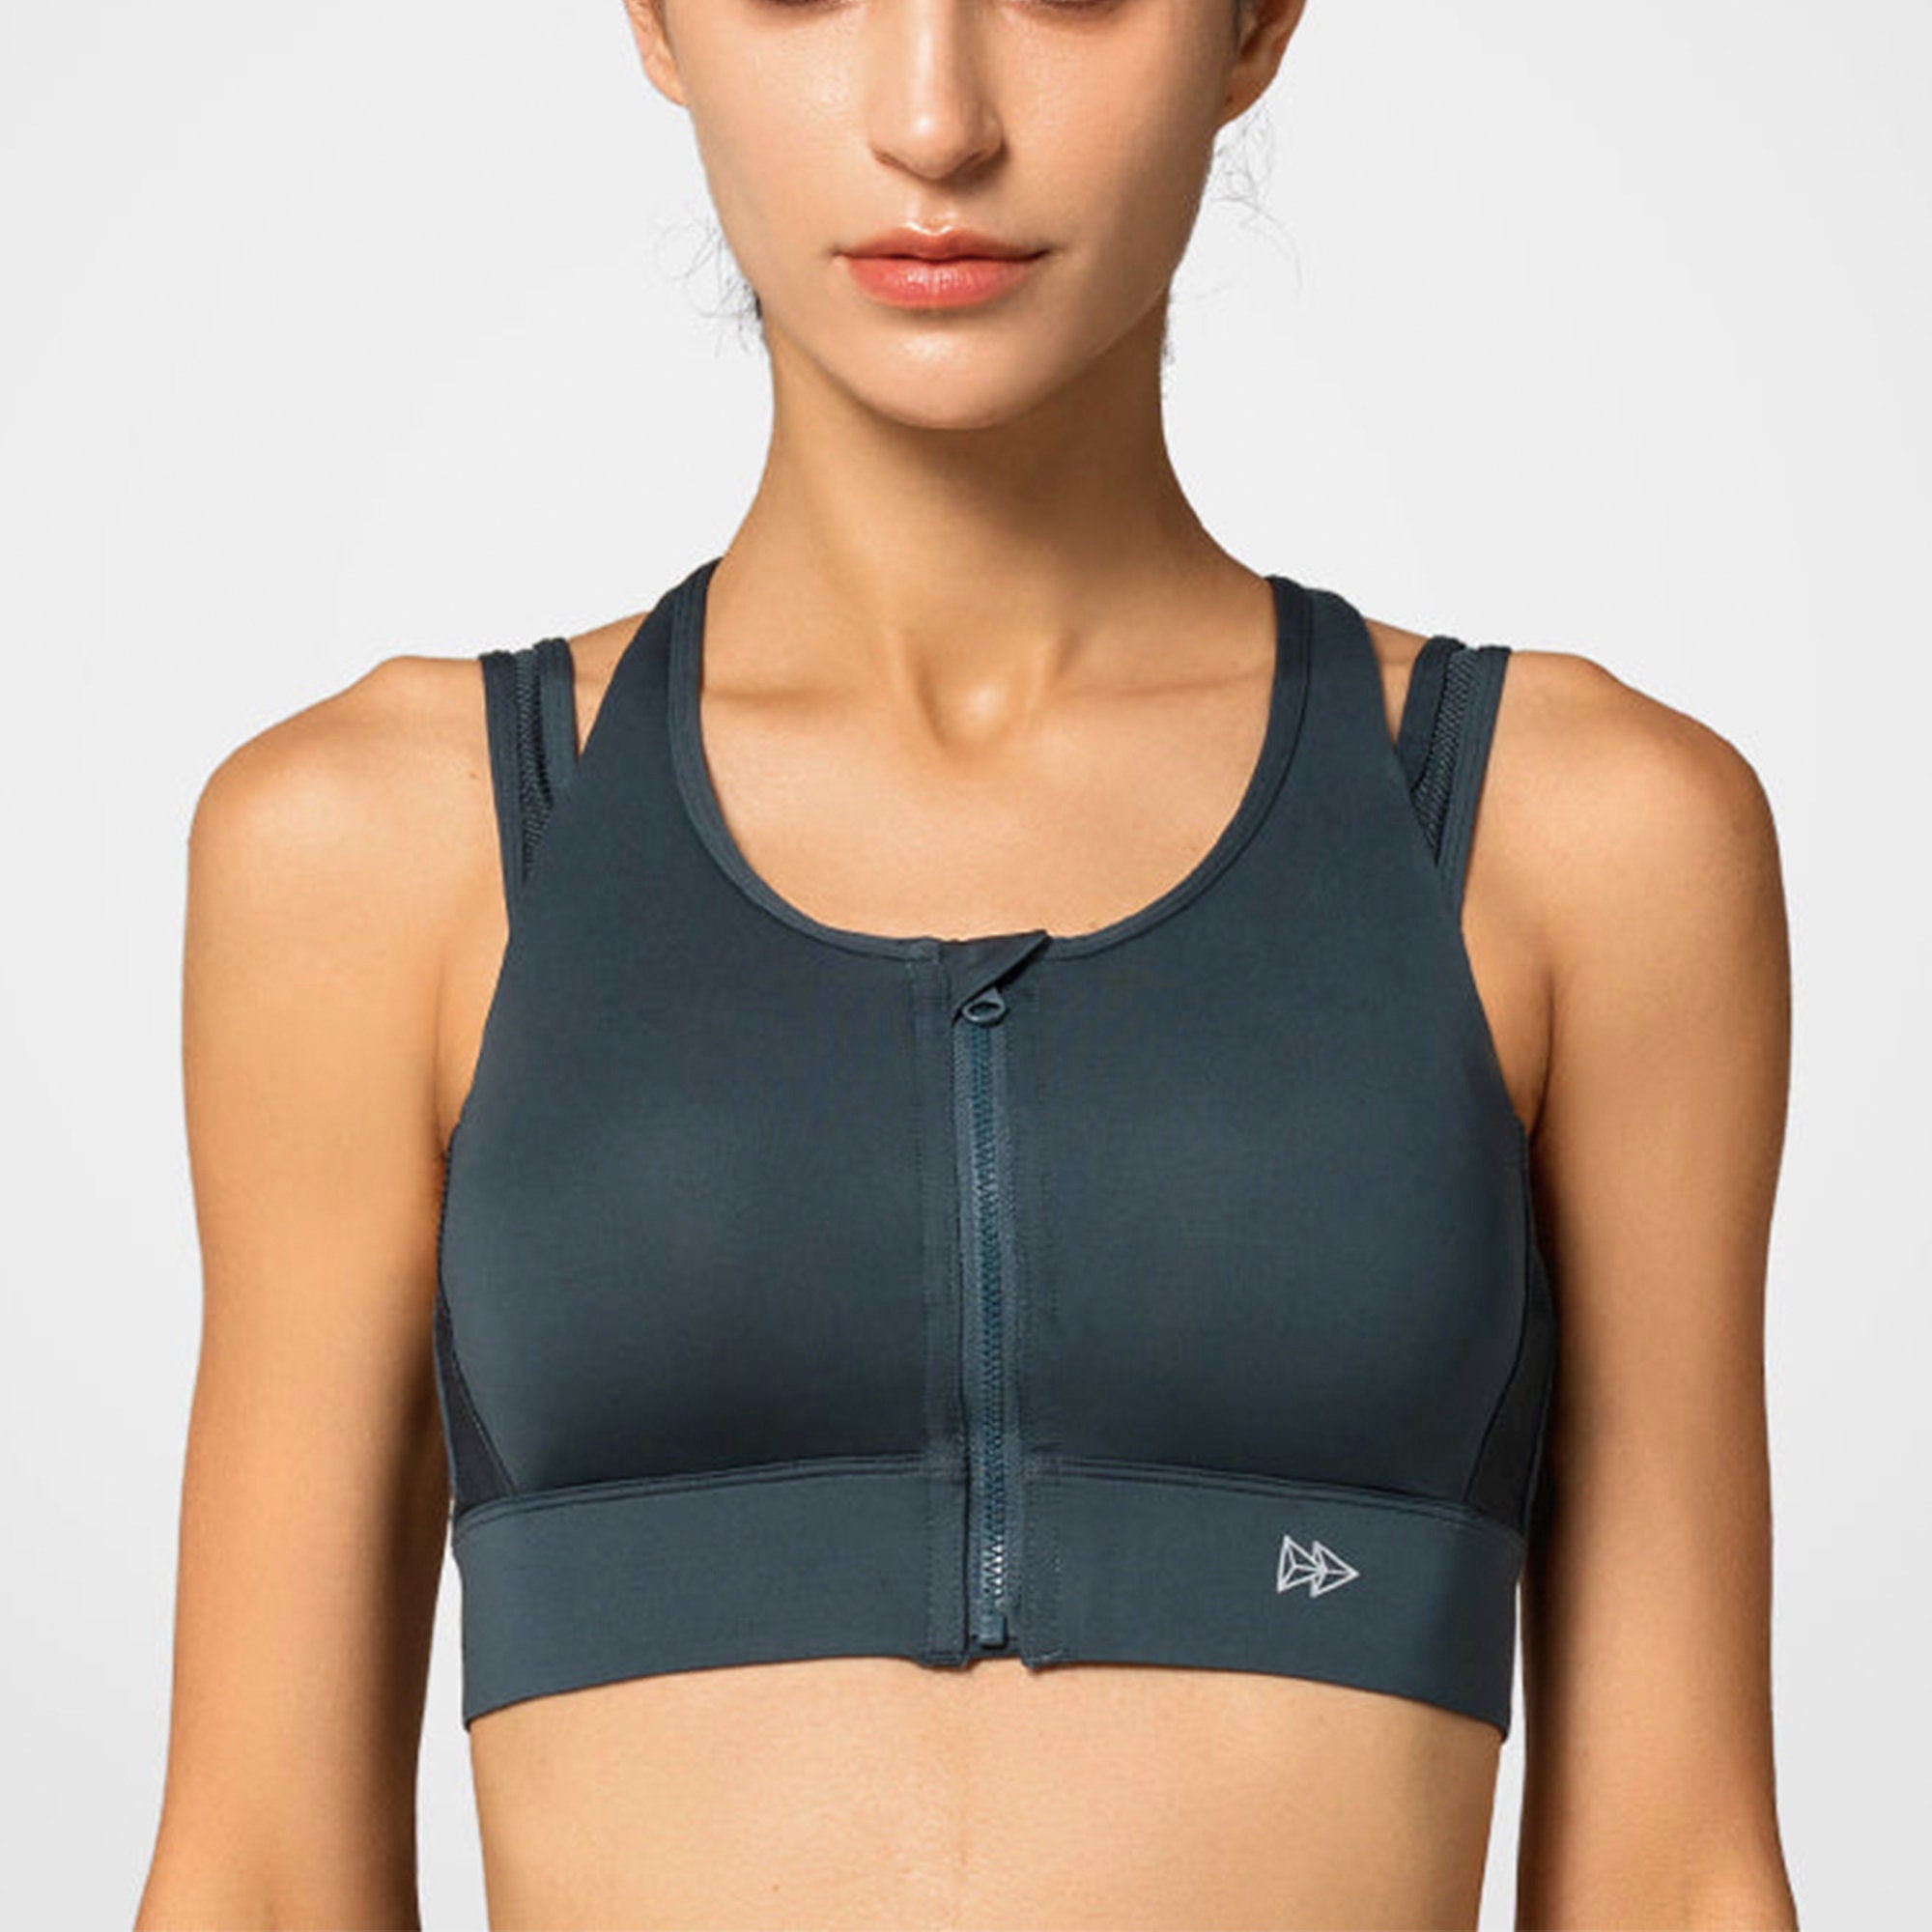 Buy High Impact Sports Bra Non-removable Molded Cups Shift Zip